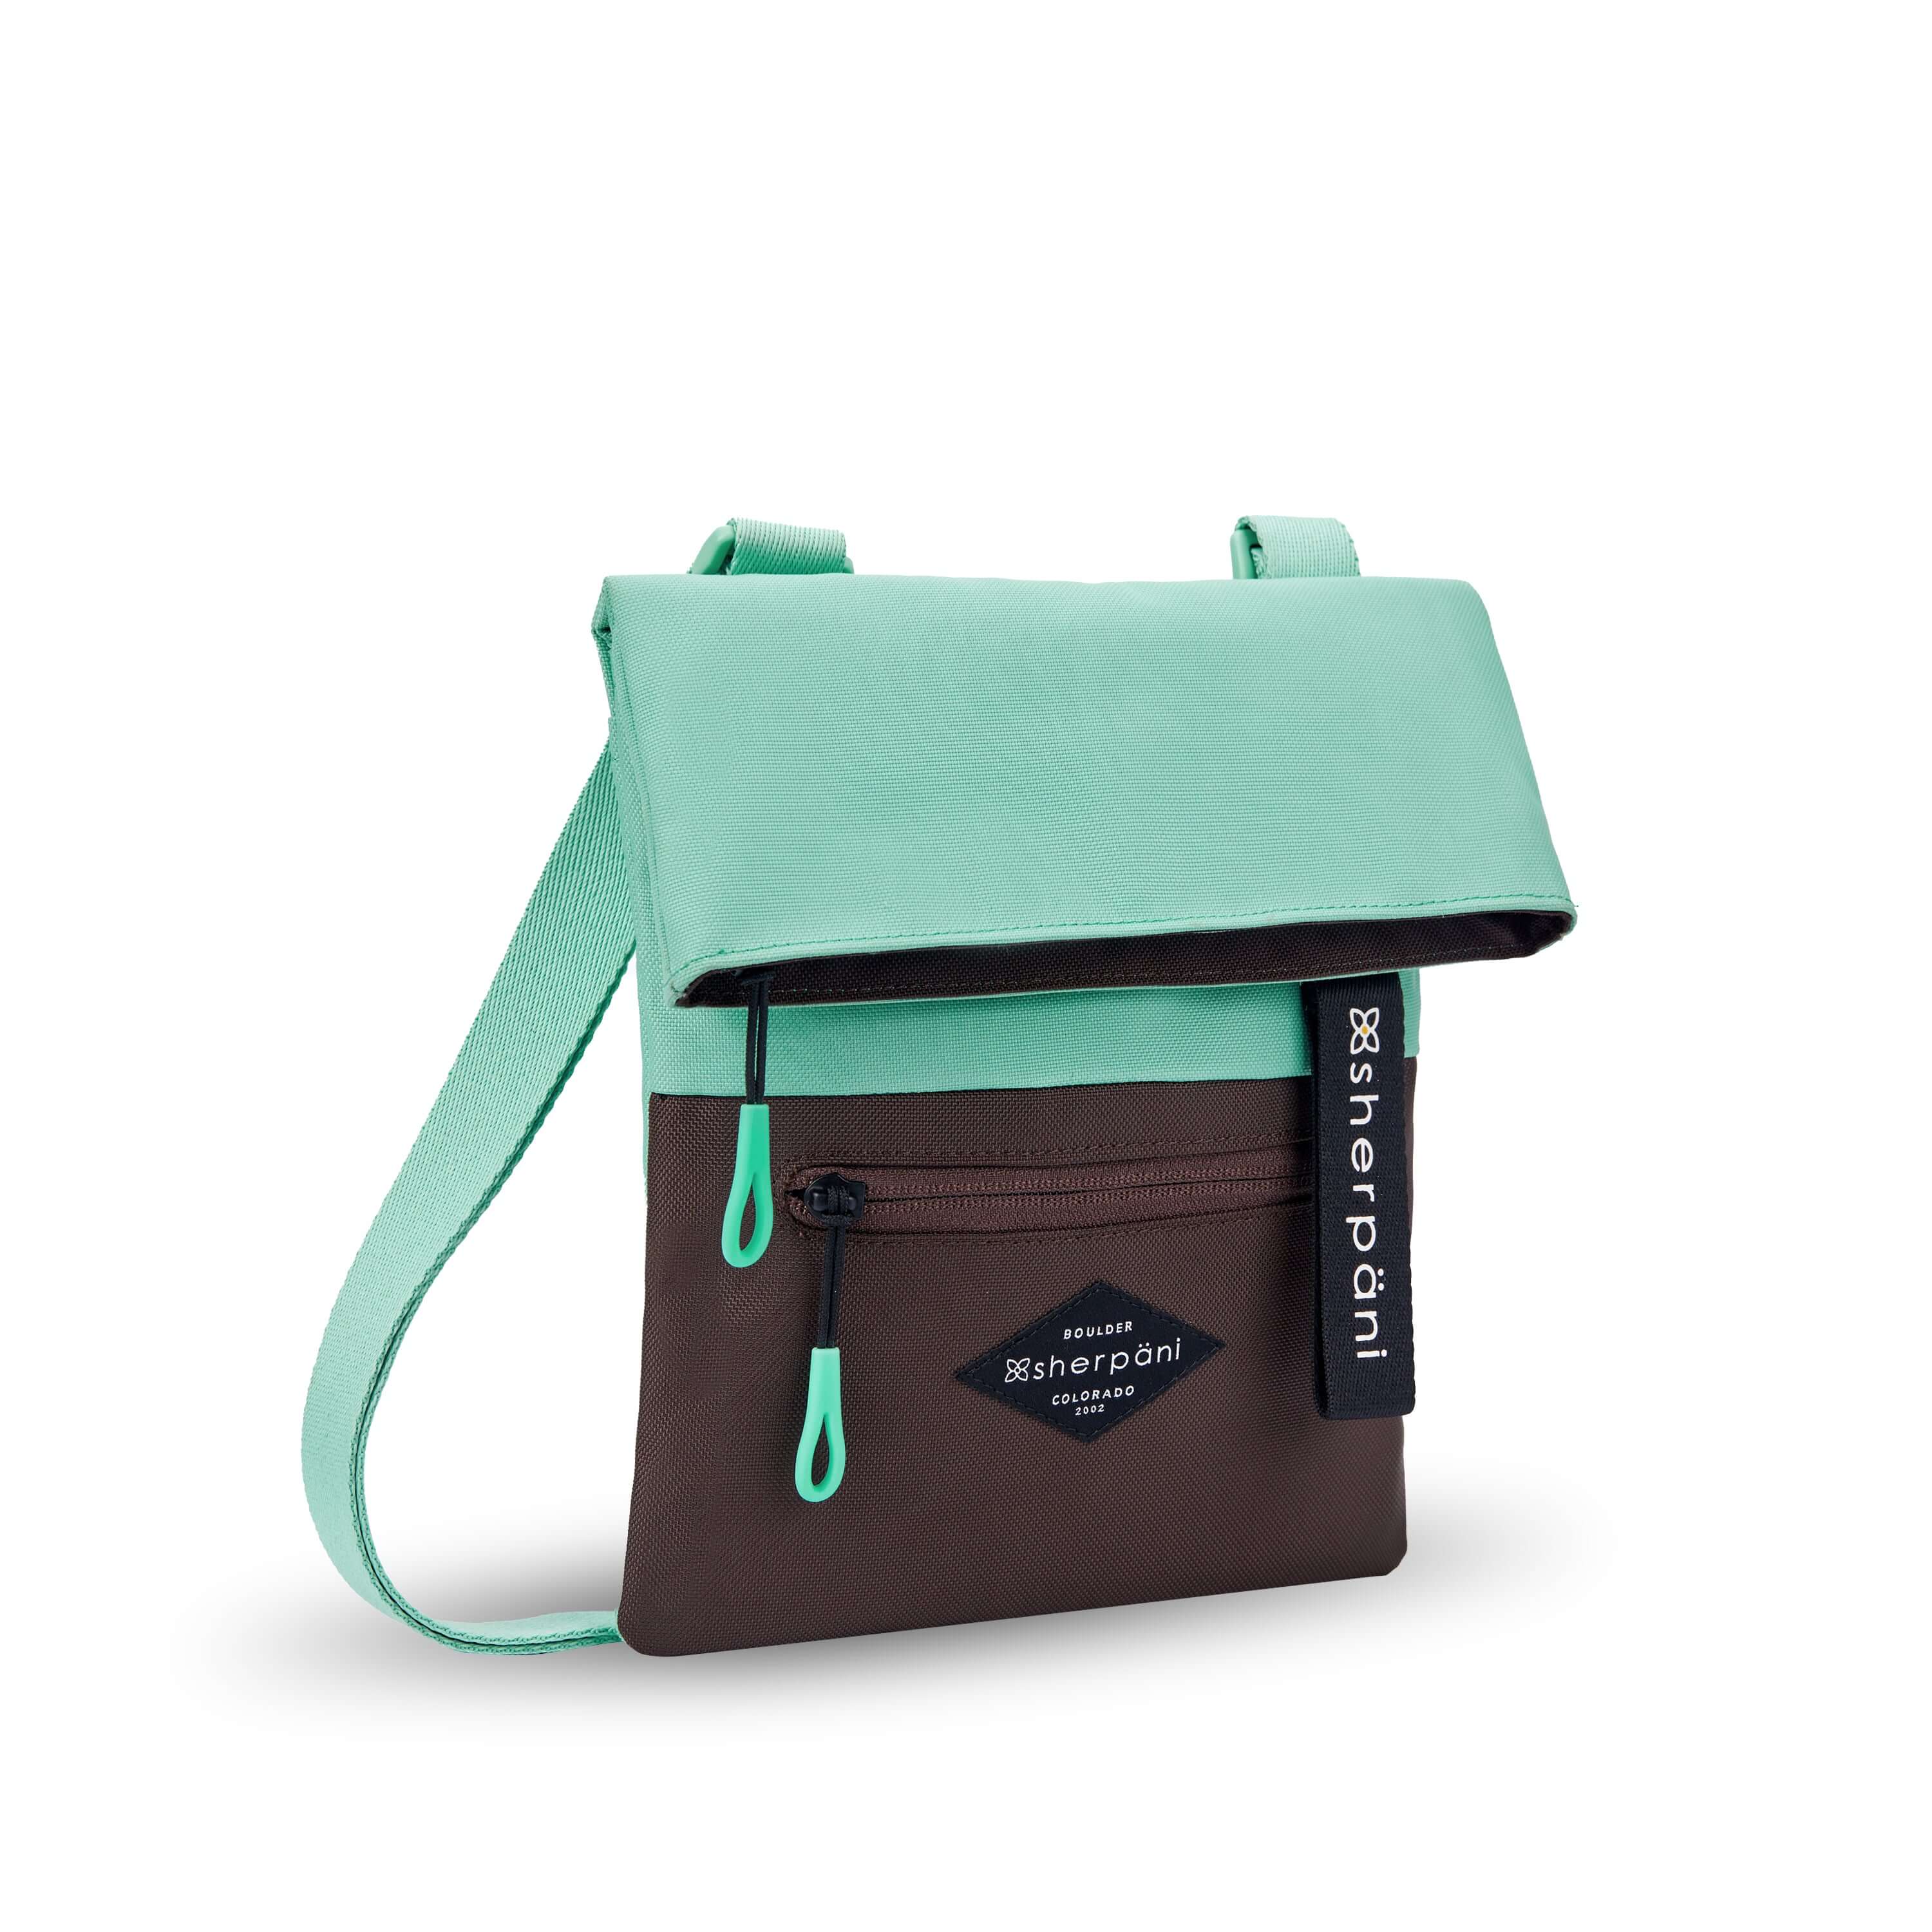 Angled front view of Sherpani crossbody, the Pica in Seagreen. The bag is two toned: the top half is light green and the bottom half is brown. There is an external zipper pocket on the front panel. Easy-pull zippers are accented in light green. The top of the bag folds over creating a signature look. A branded Sherpani keychain is clipped to the upper right corner. The bag has an adjustable crossbody strap. 